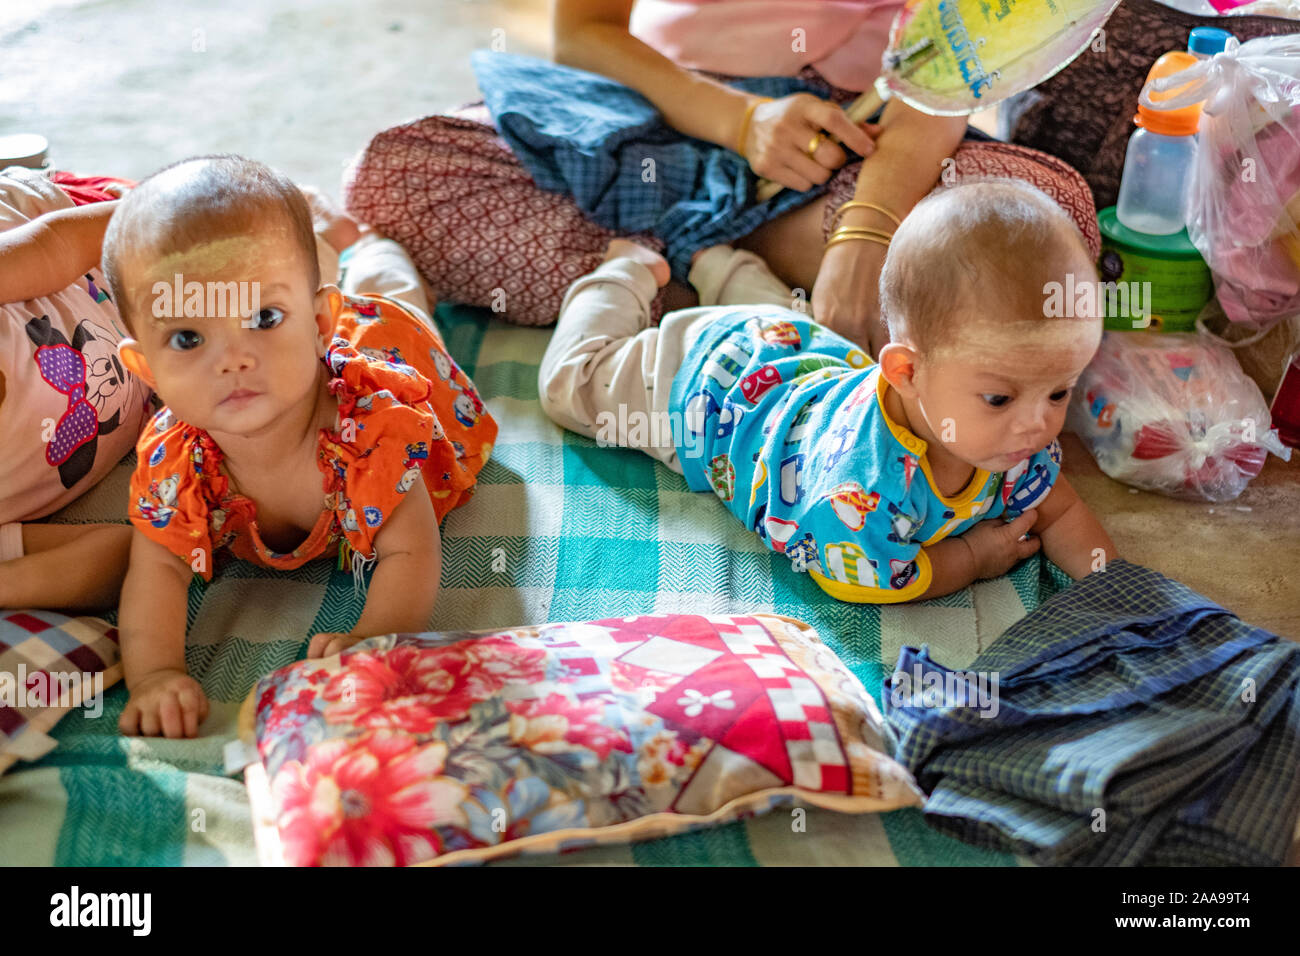 Twin Burmese babies romp on the floor of their mother's market stall in rural Myanmar (Burma) with sun protecting powder on their faces Stock Photo